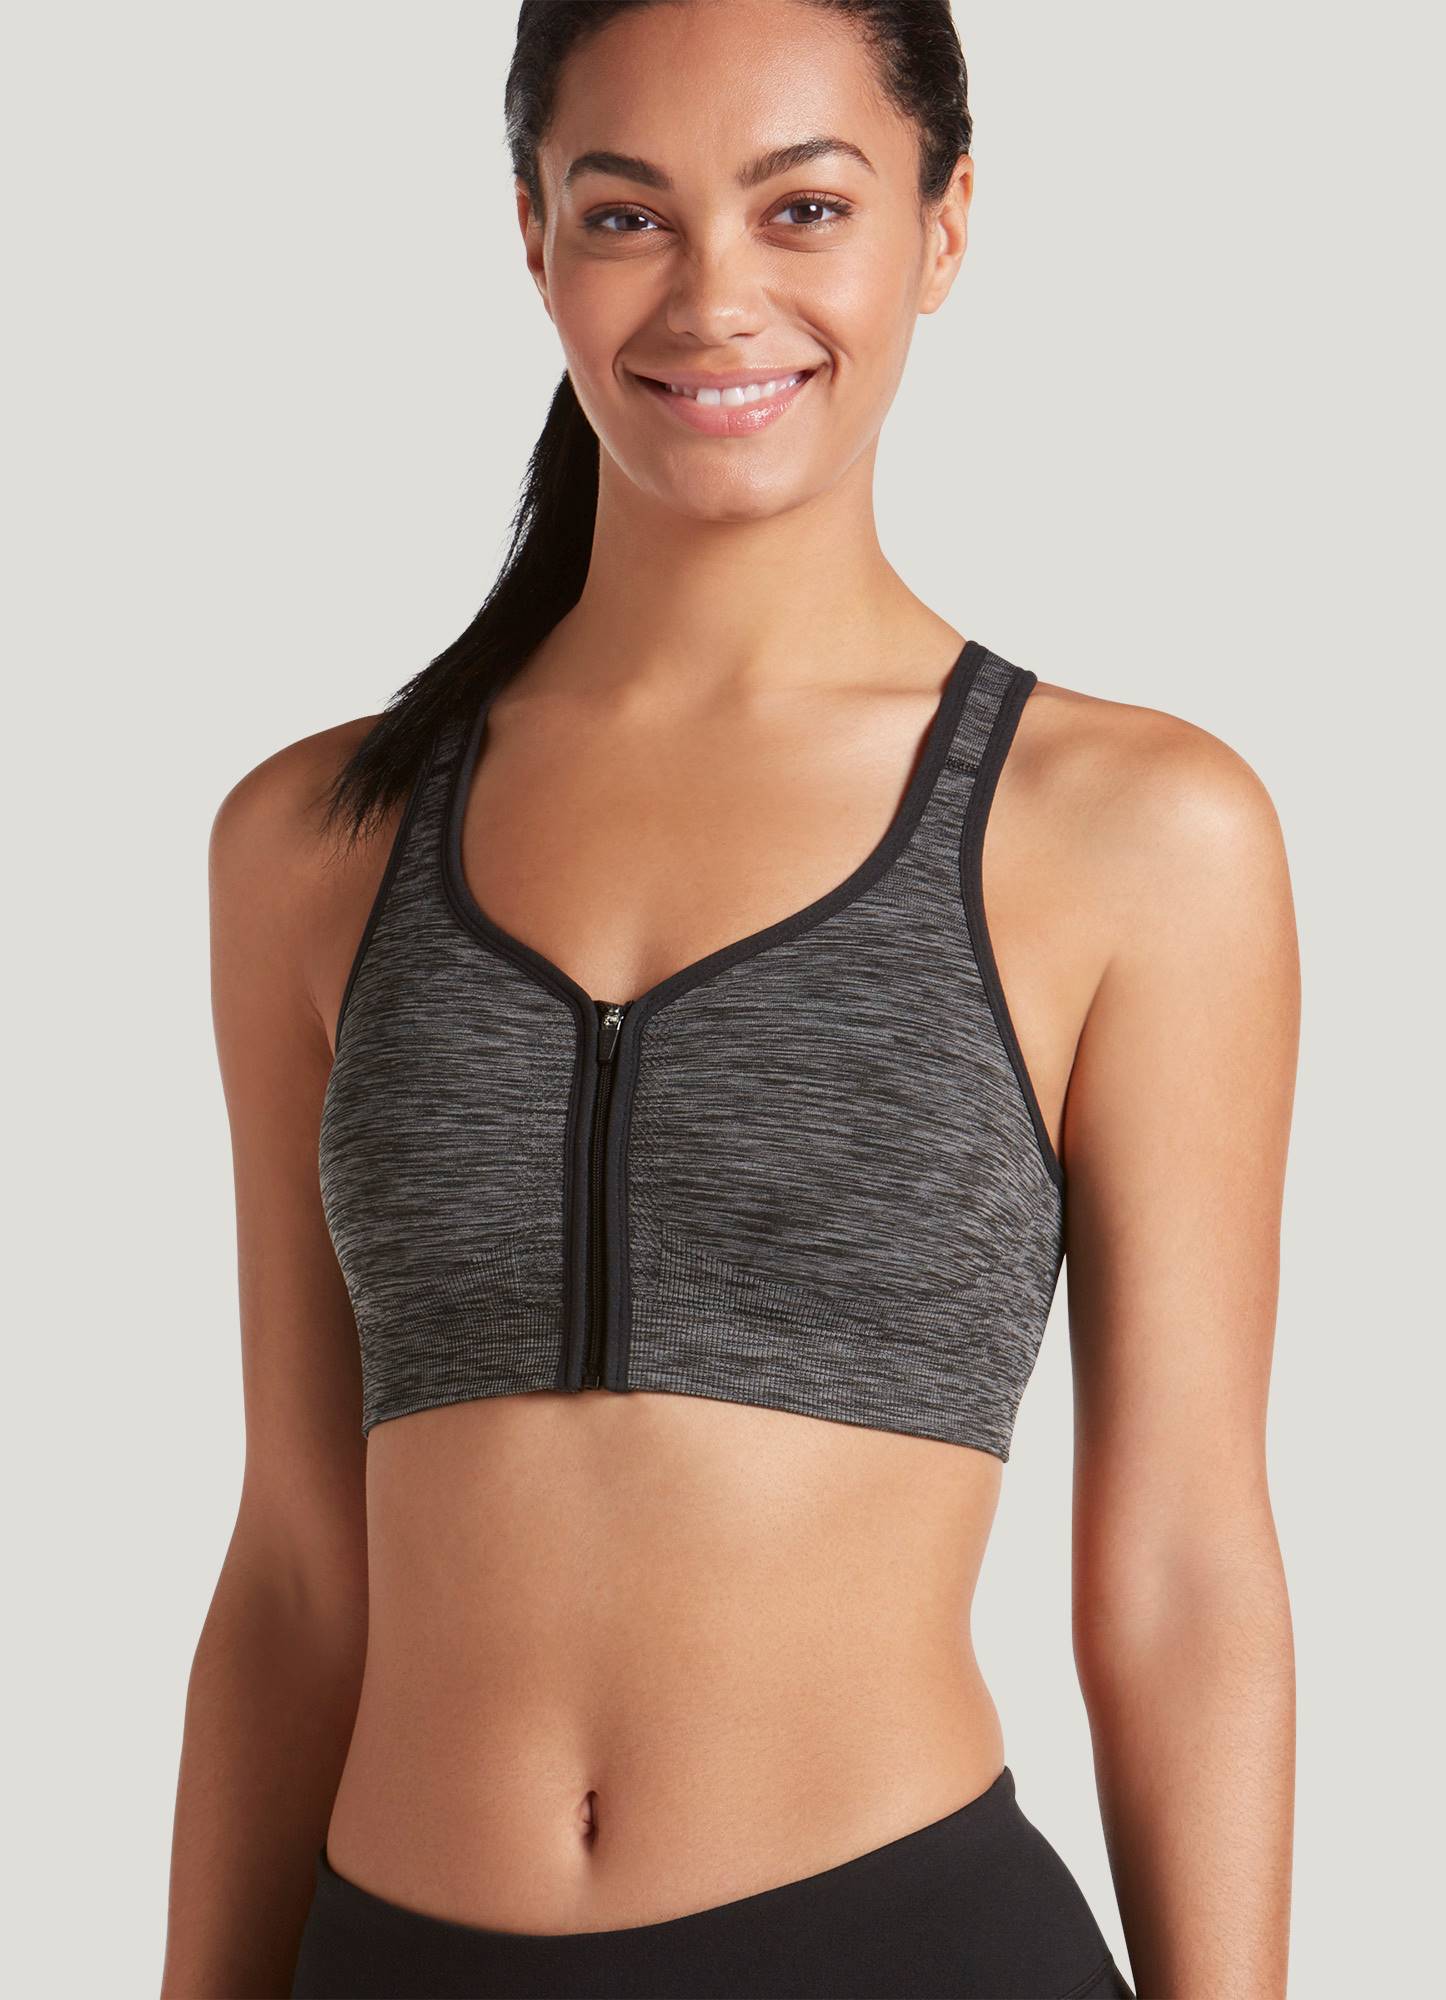 Valmont Zip Front Leisure and Sports Bra 1611B (Oatmeal/Black, 38F/G)